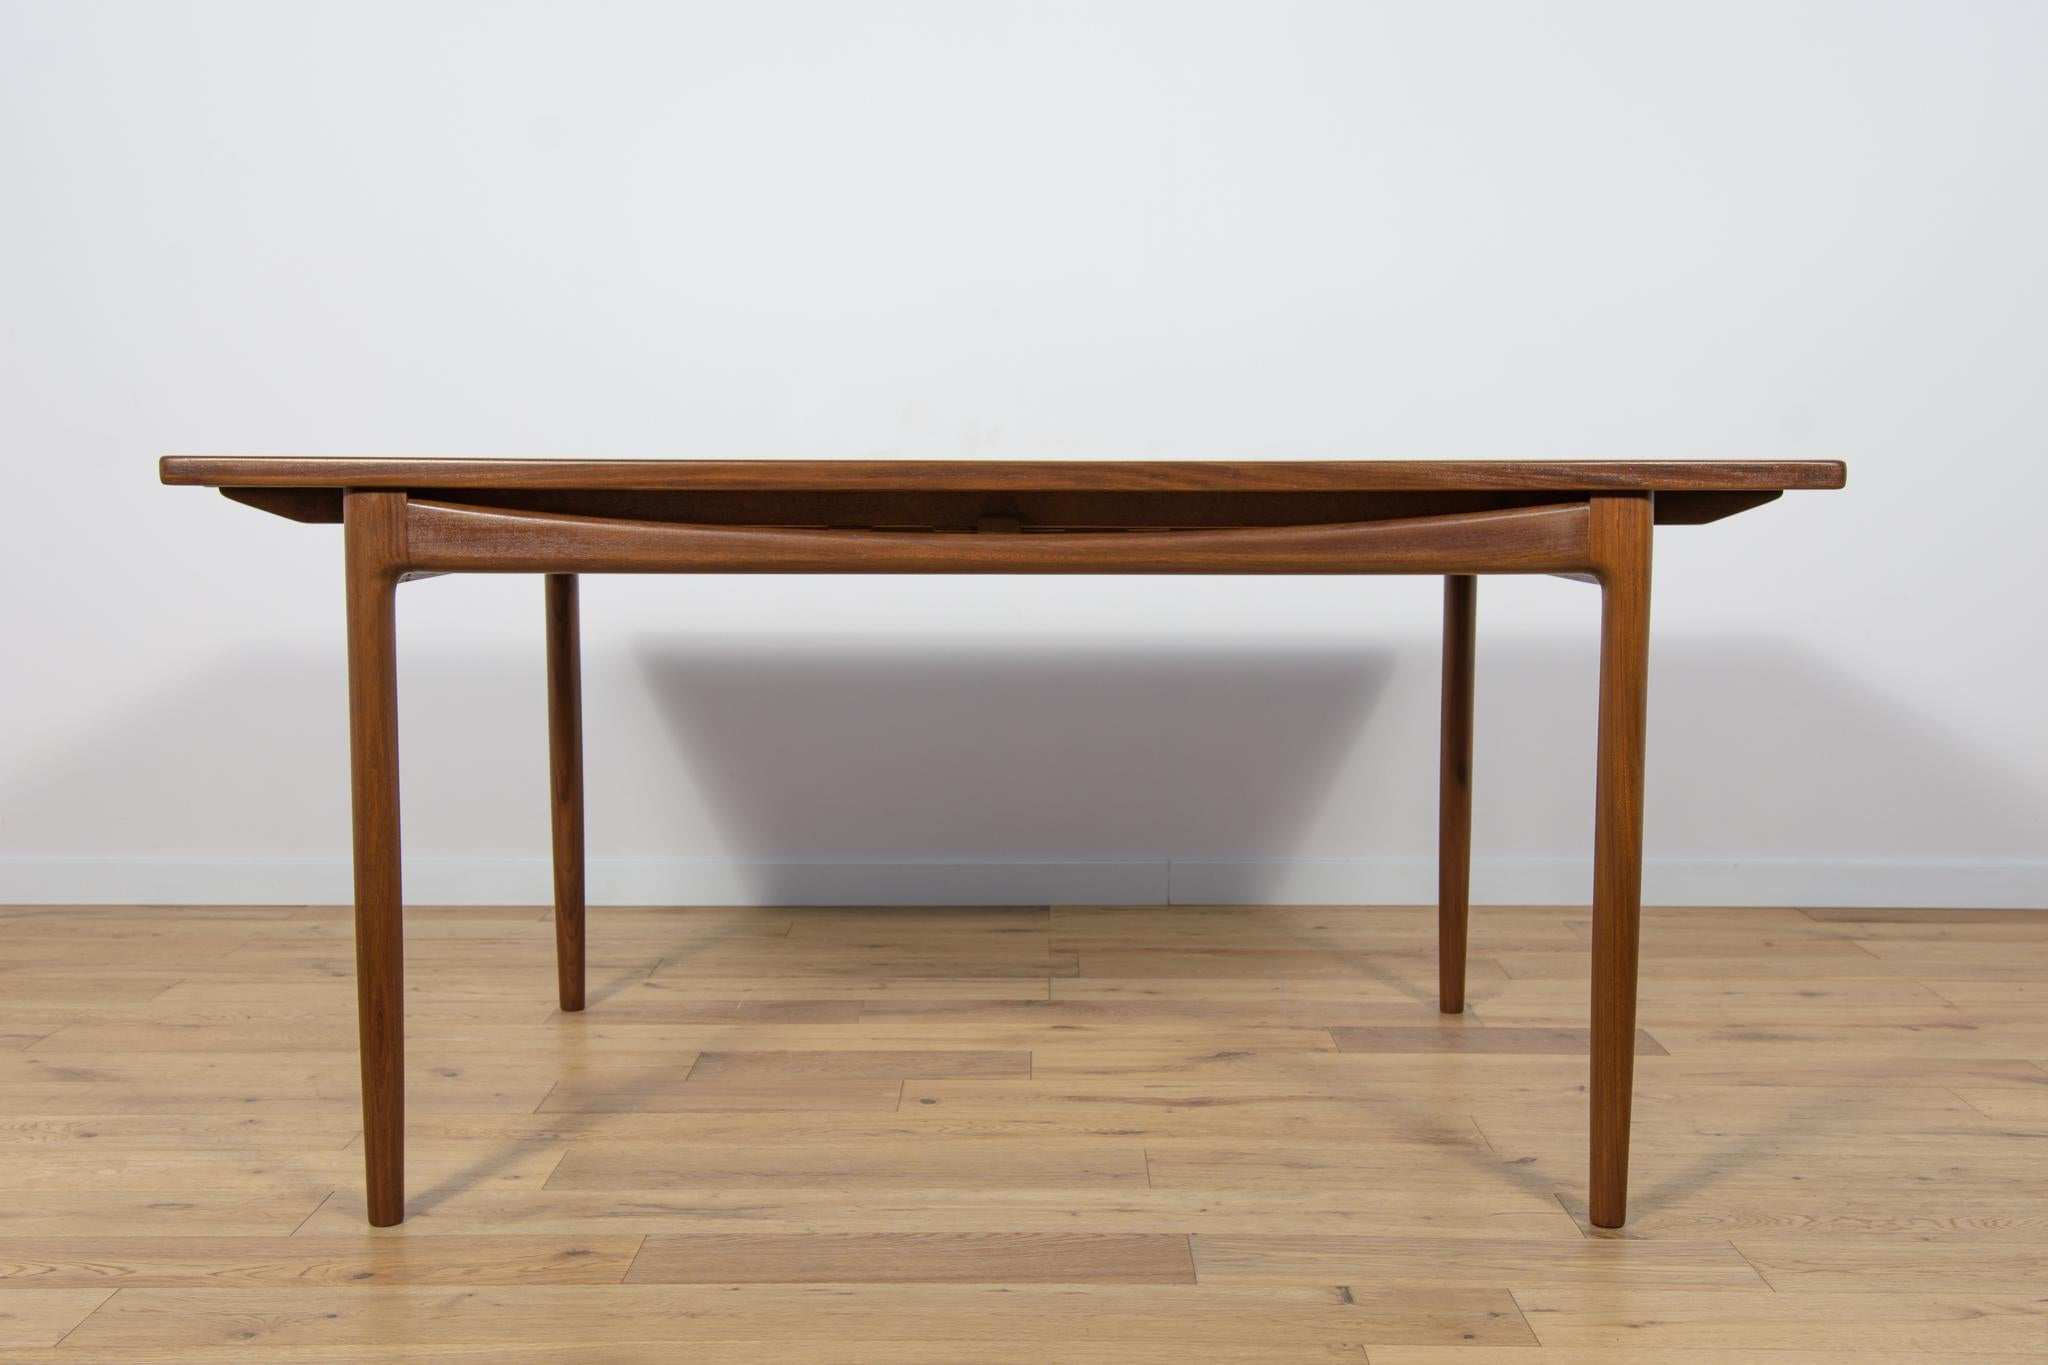 
This magnificent mid-century dining table was designed by Ib Kofod-Larsen and manufactured by G-Plan circa 1960. It is made teak. The table has border and fram made of solid teak. The table has profiled bottom strips, giving it a unique character.